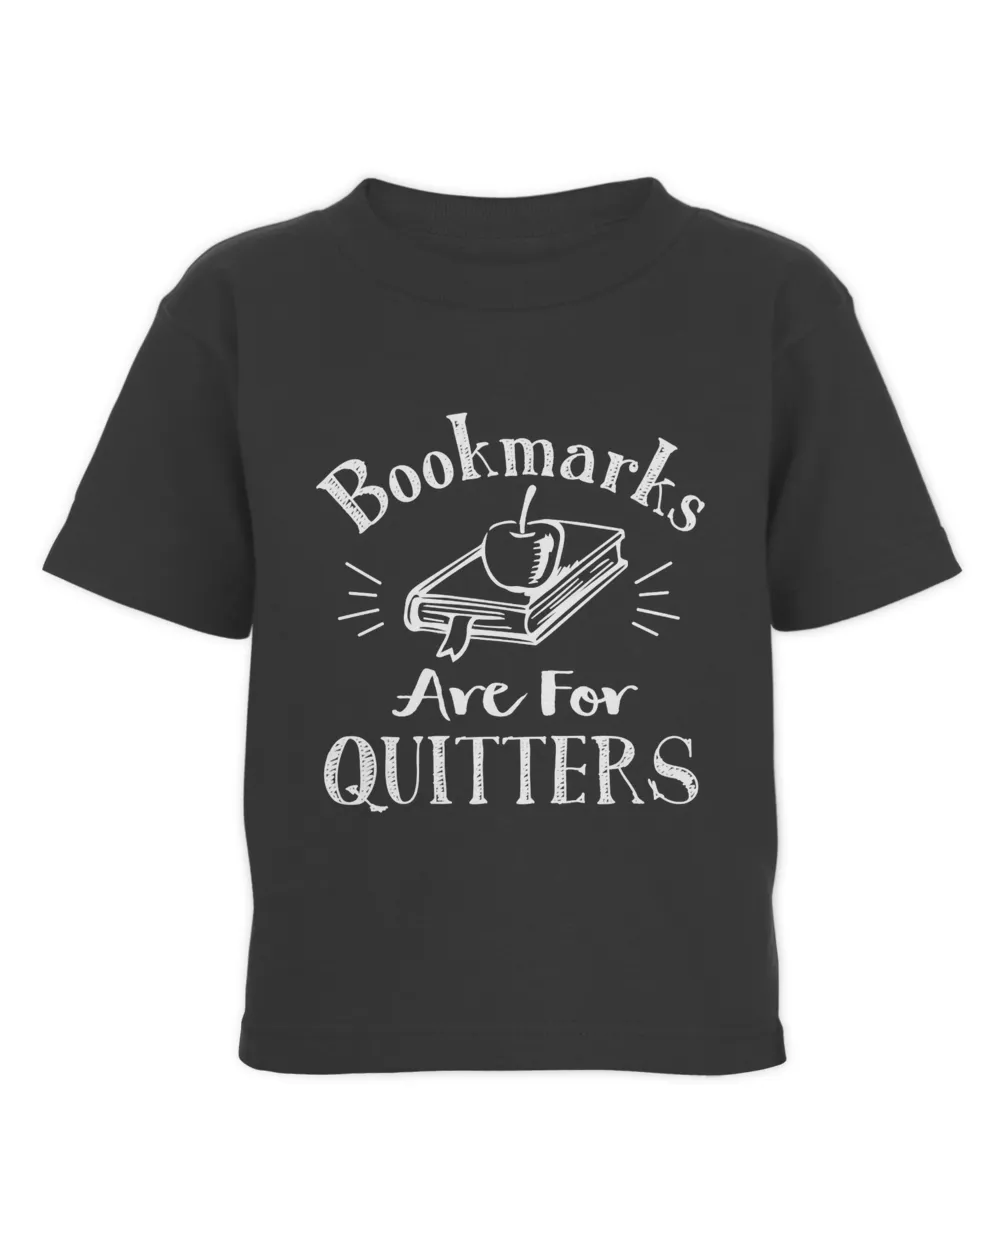 Bookmarks are for quitters